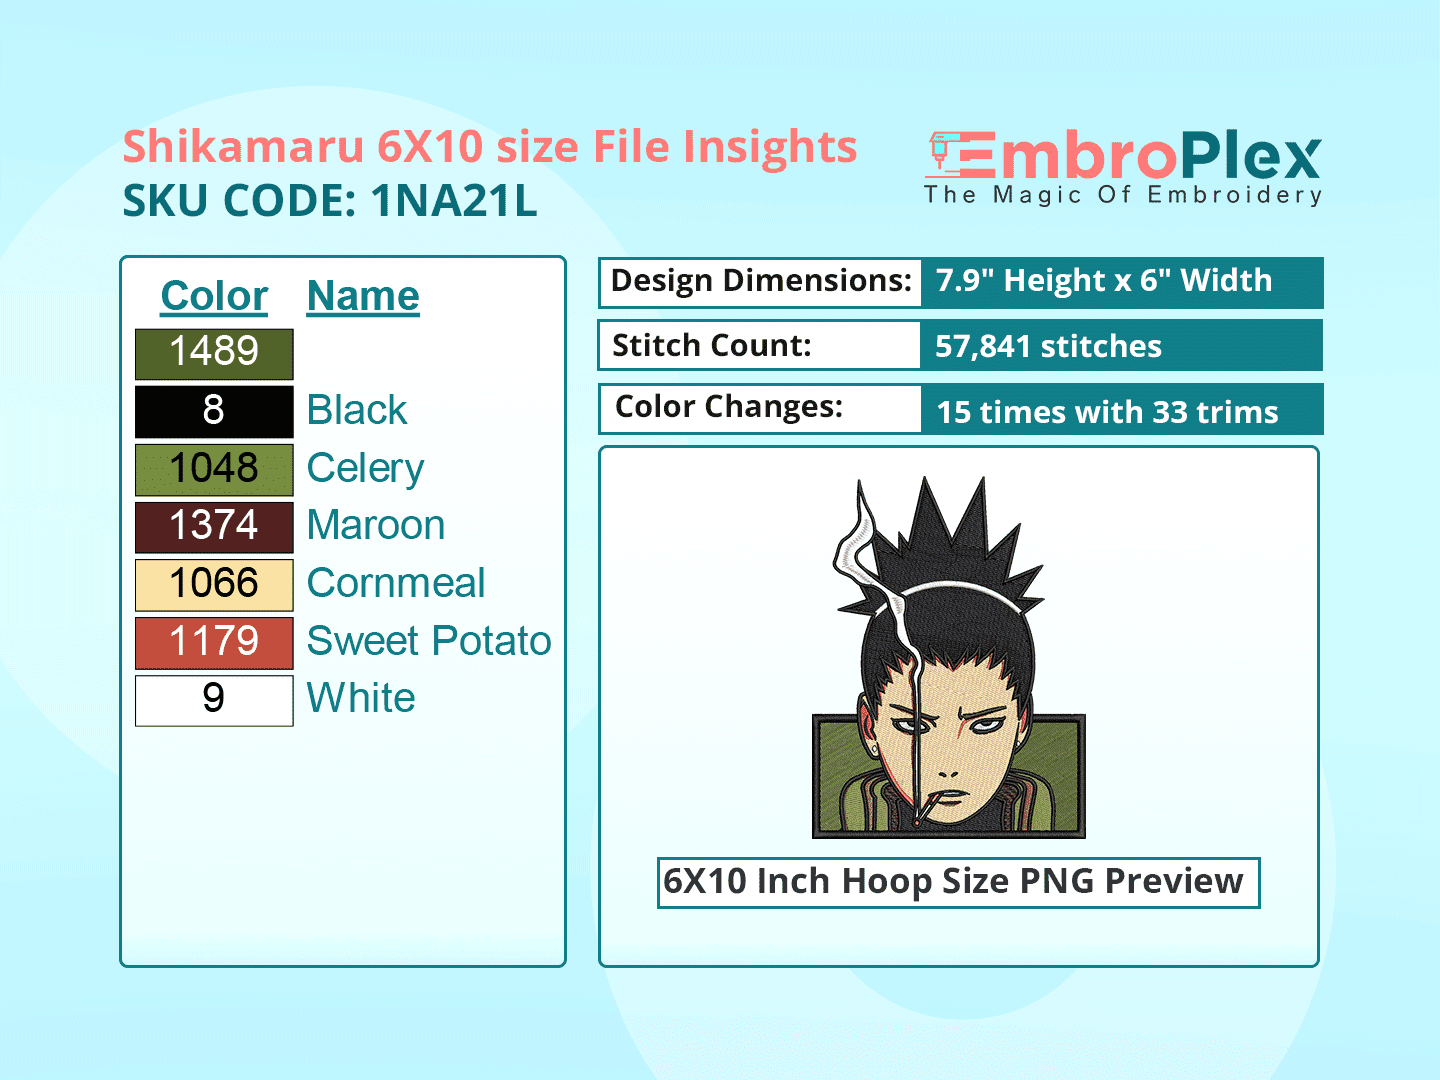 Anime-Inspired  Shikamaru Nara Embroidery Design File - 6x10 Inch hoop Size Variation overview image